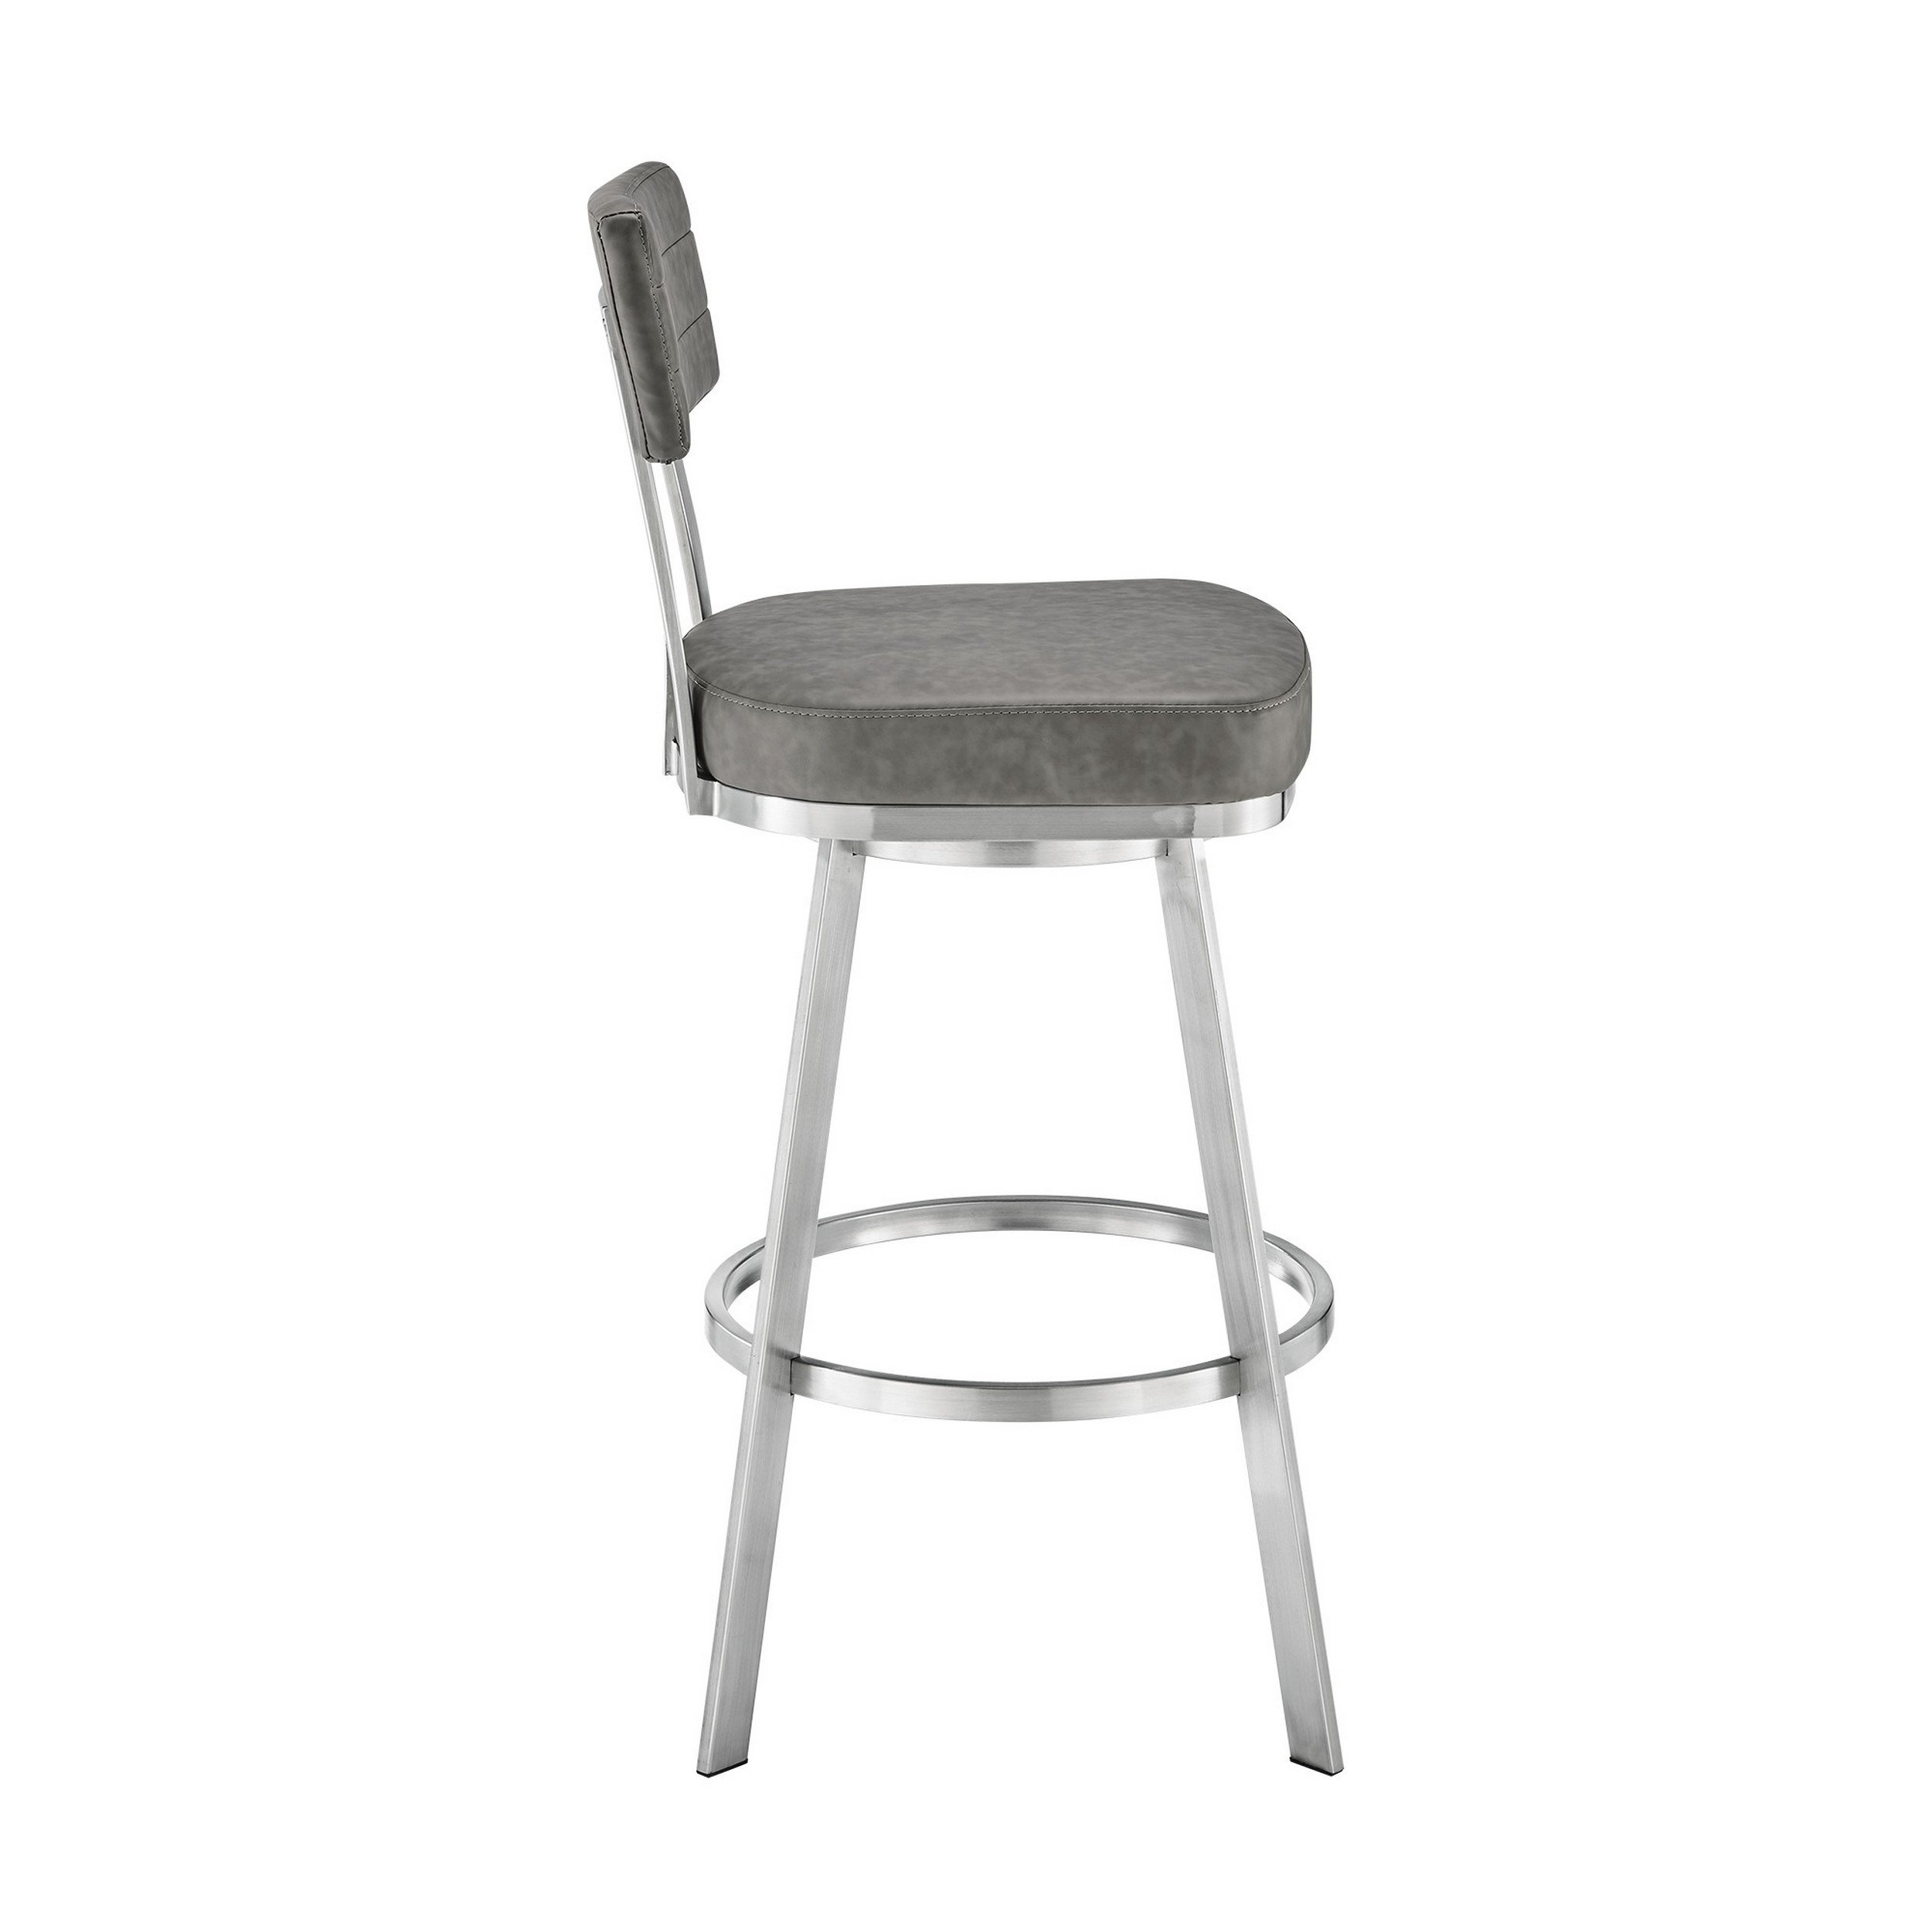 Col 26 Inch Swivel Counter Stool, Gray Faux Leather, Stainless Steel Frame- Saltoro Sherpi